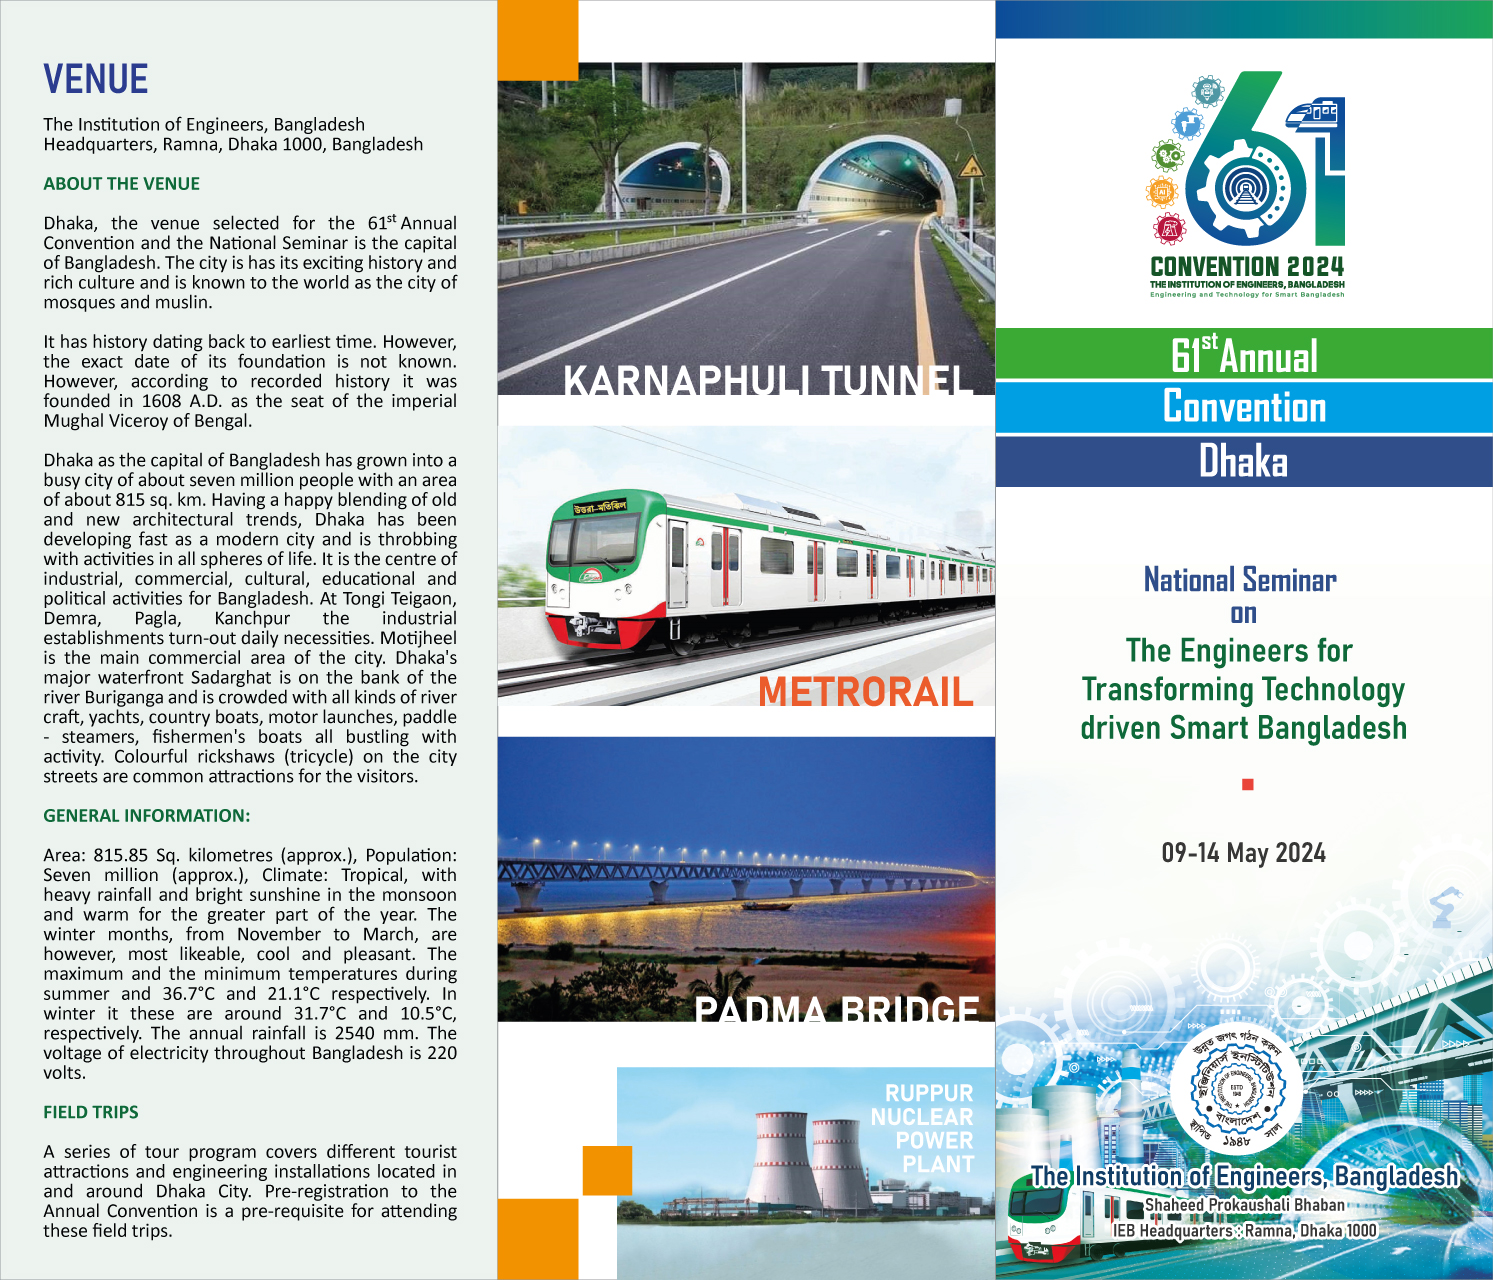 Call for Paper (National Seminar on The Engineers for Transforming Technology driven Smart Bangladesh)